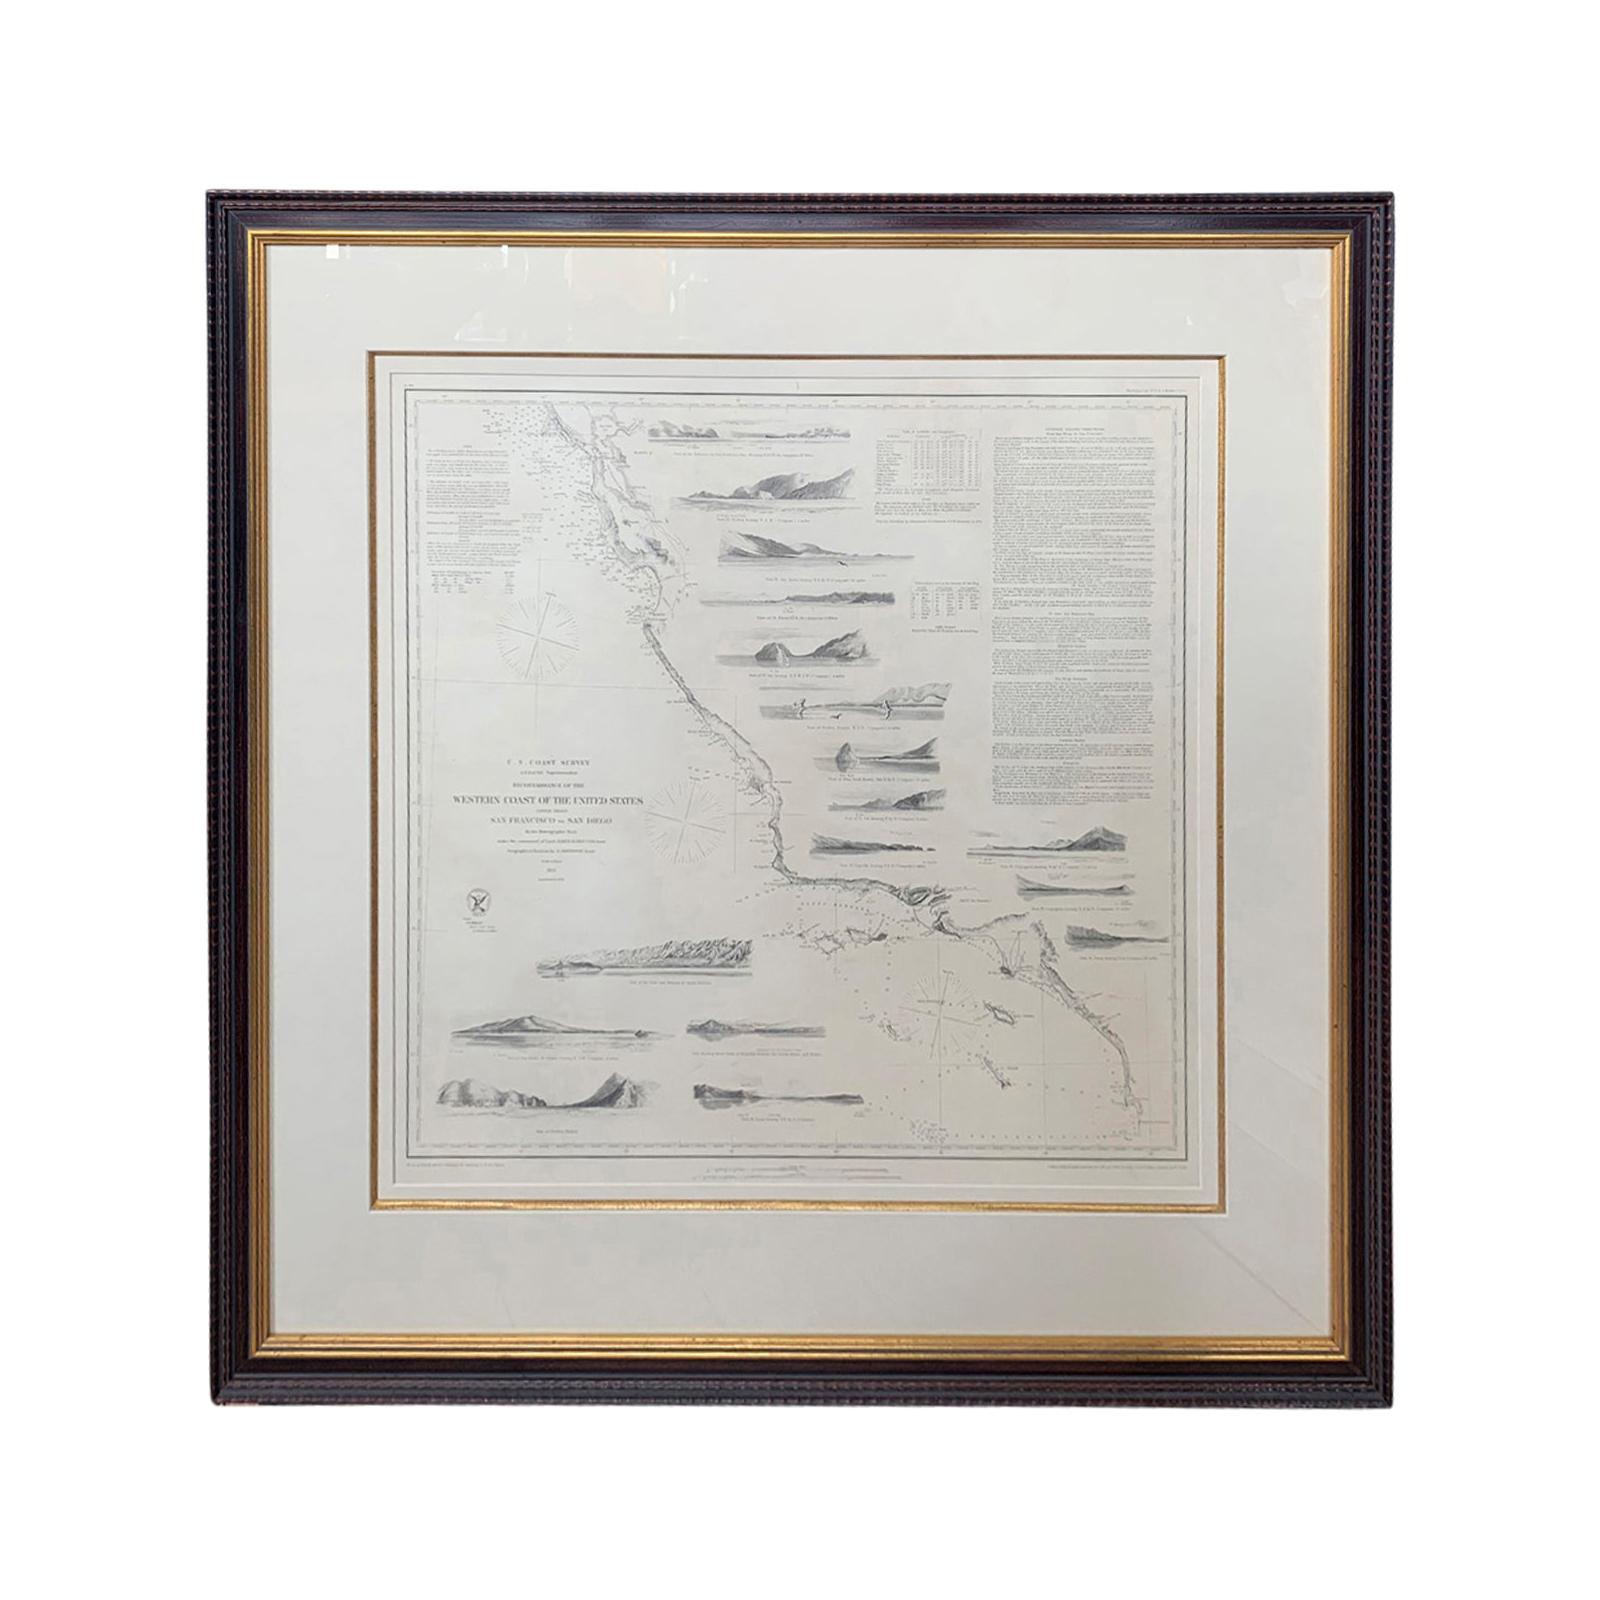 Print of Reconnaissance of the West Coast of U.S. San Francisco to San Diego Map